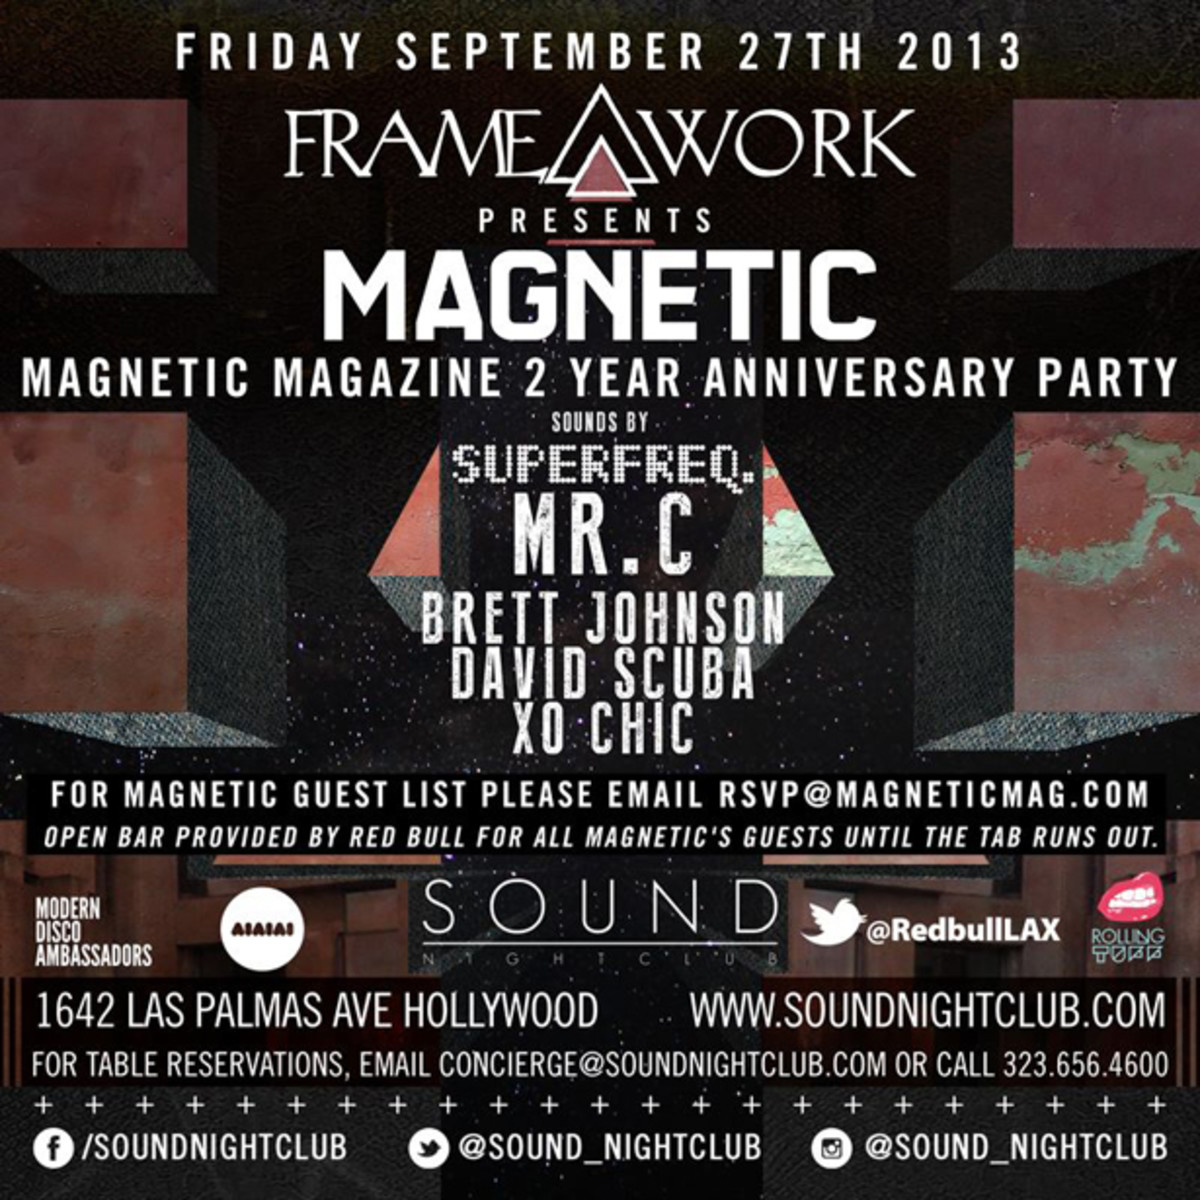 Magnetic Magazine's 2 Year Anniversary Party September 27th At Sound Nightclub In Hollywood